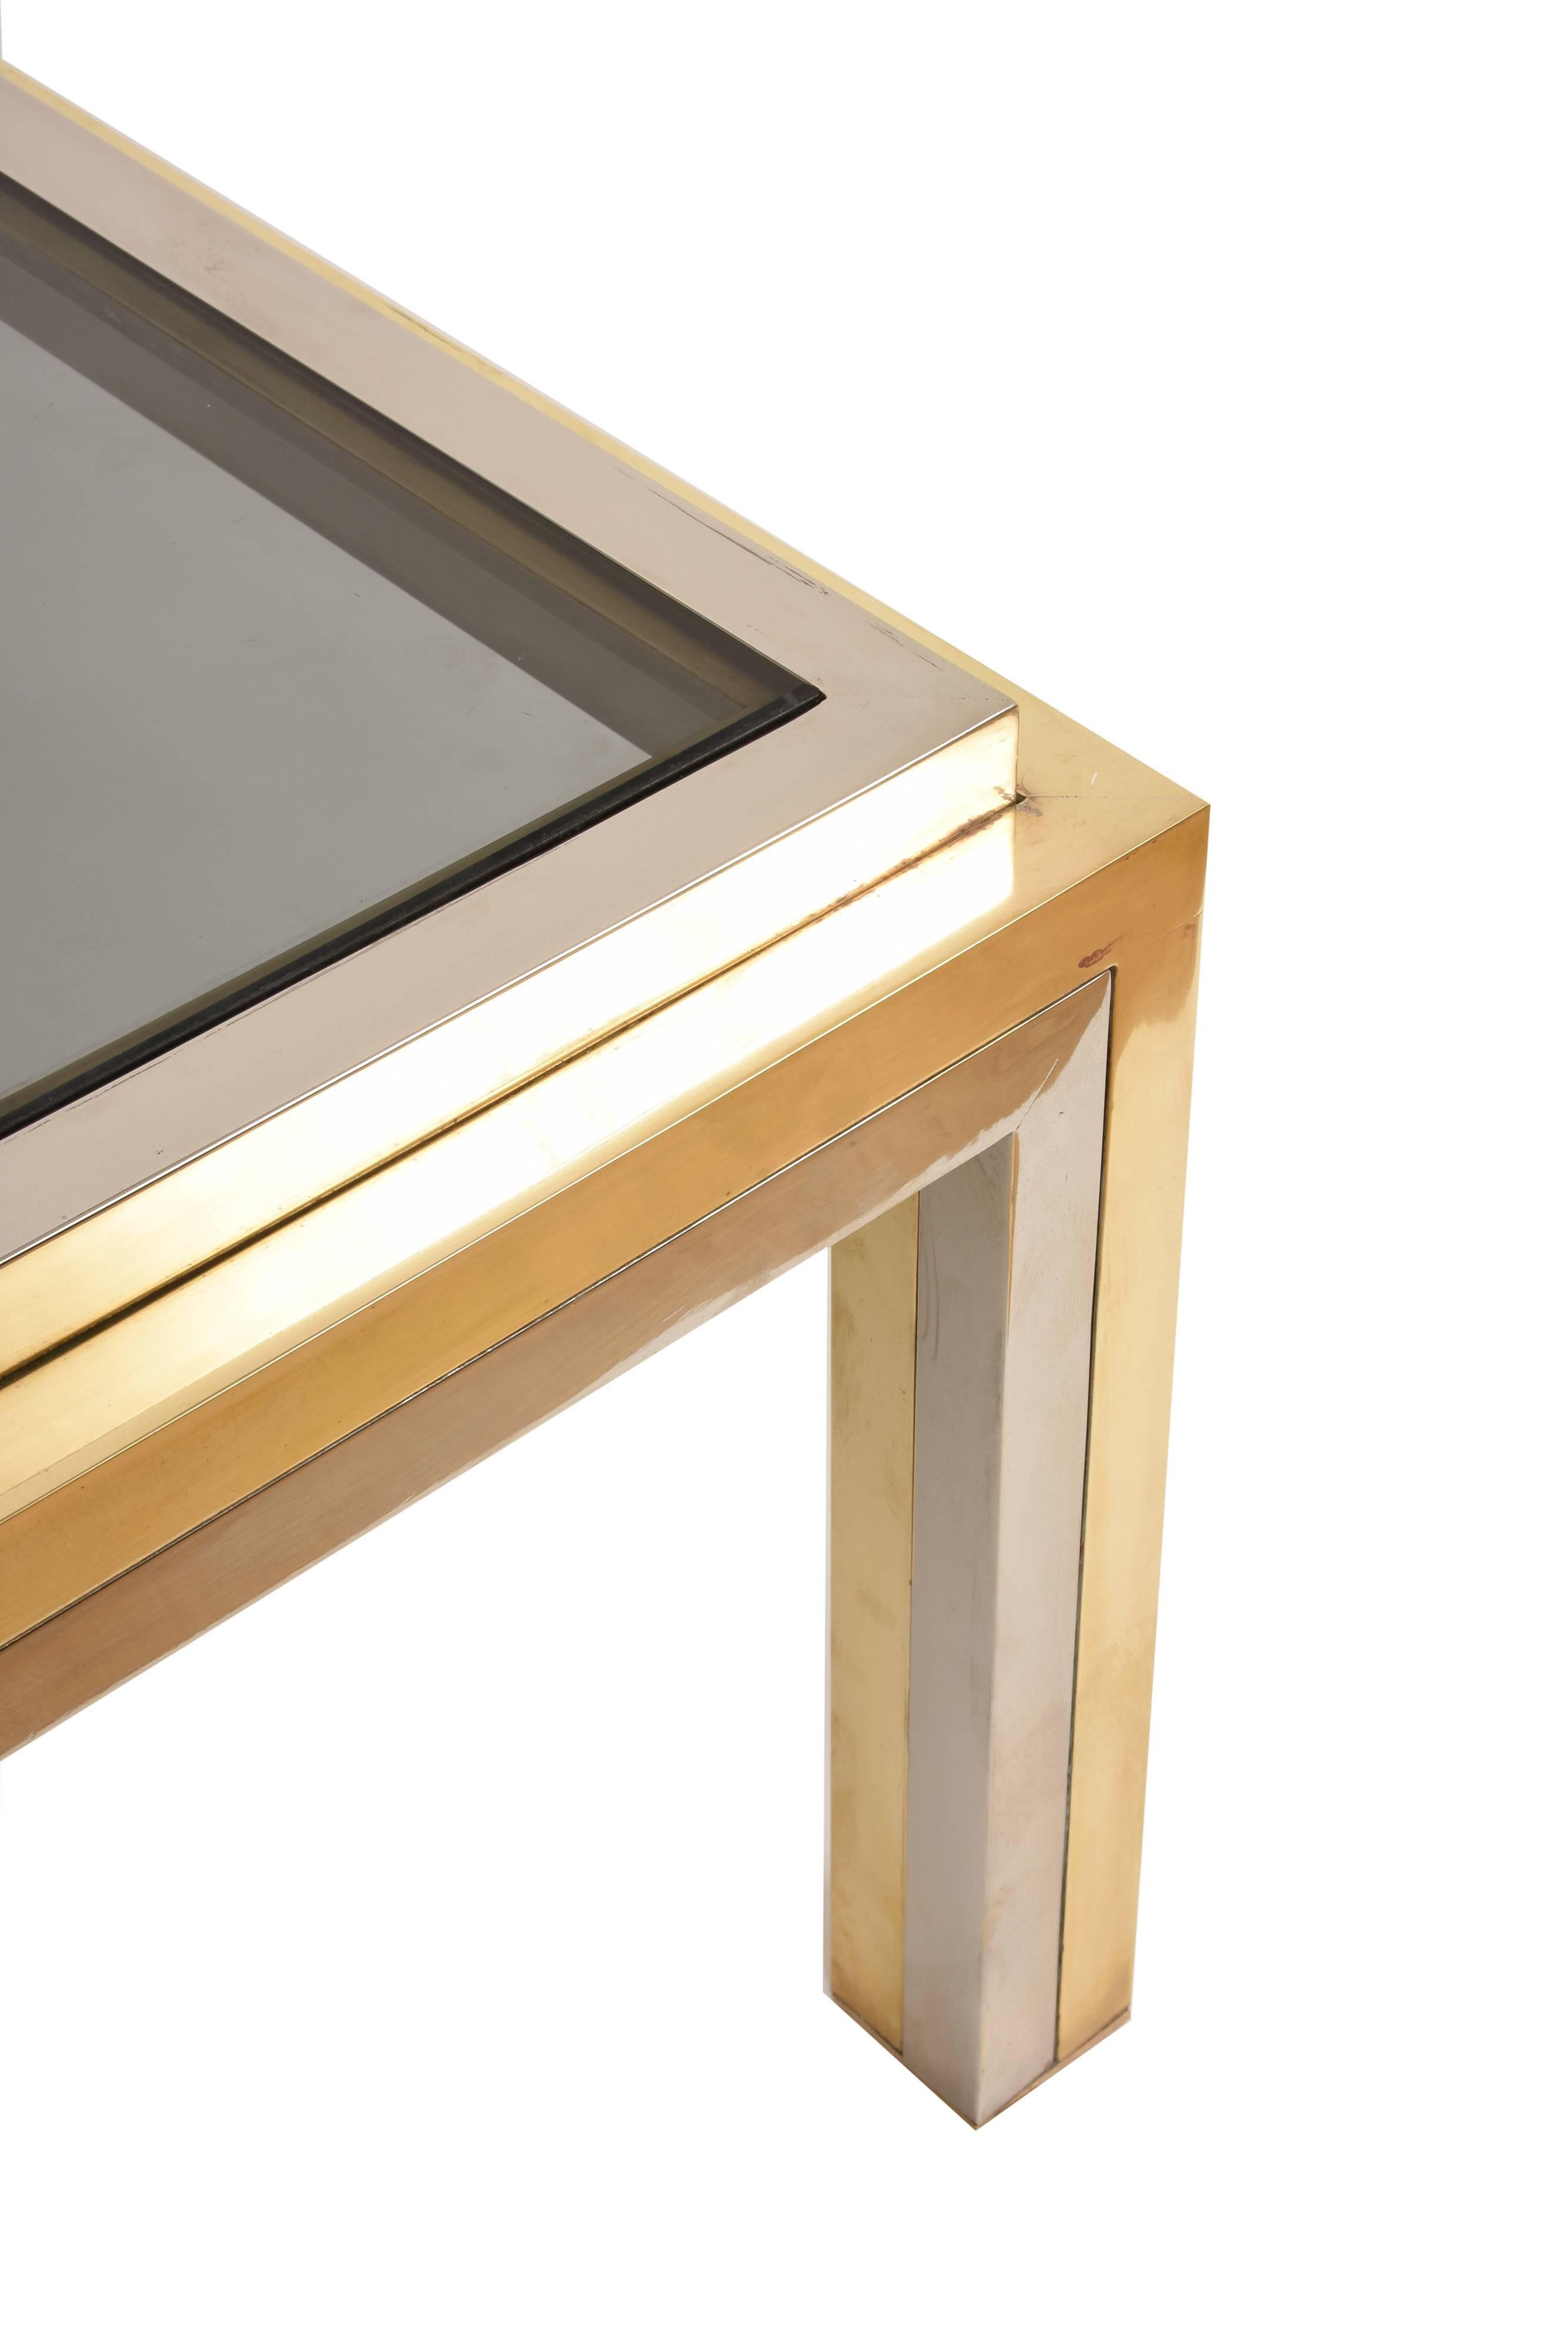 Romeo Rega, Square Coffee Table in Brass and Chrome, Smoked Glass, Italy, 1970s 1